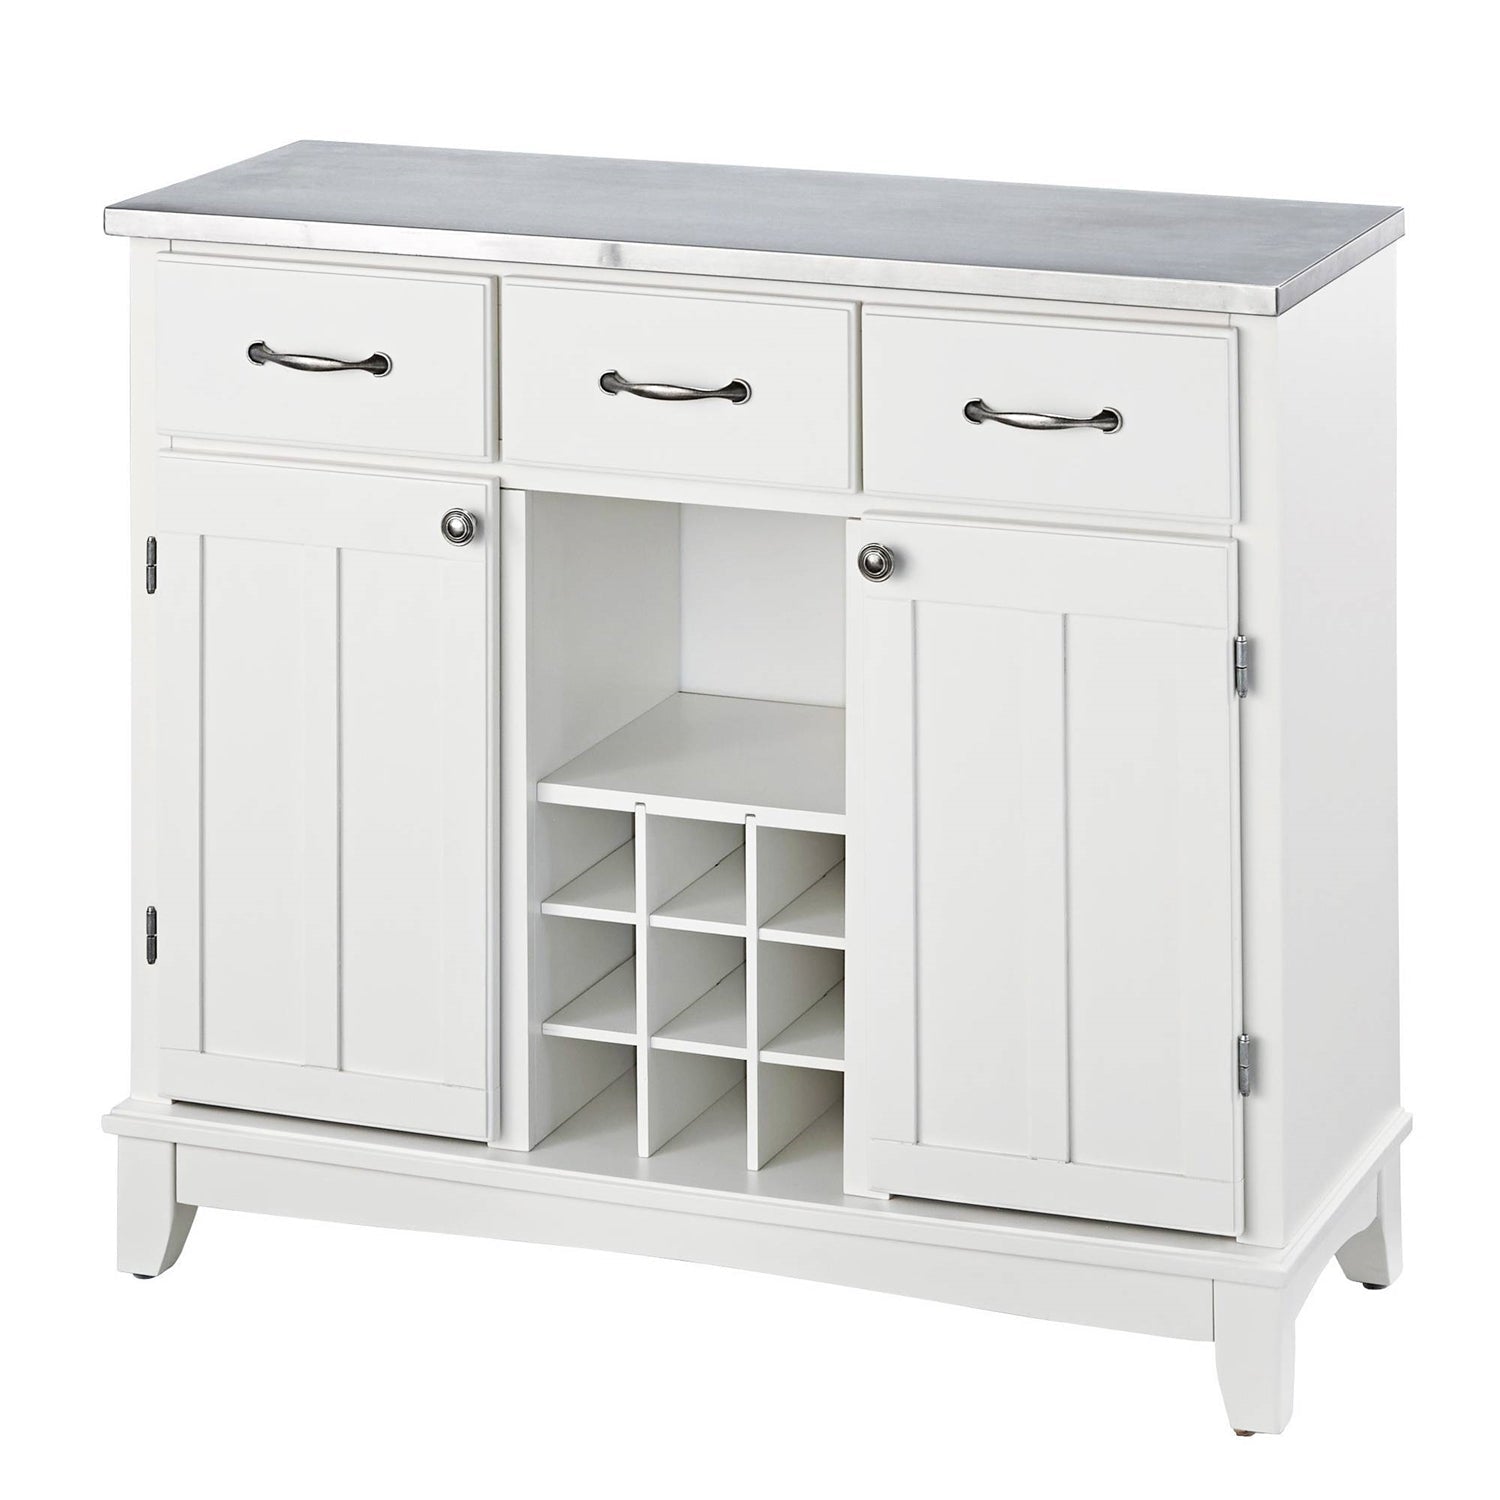 Dining > Sideboards & Buffets - Stainless Steel Top Kitchen Island Sideboard Cabinet Wine Rack In White